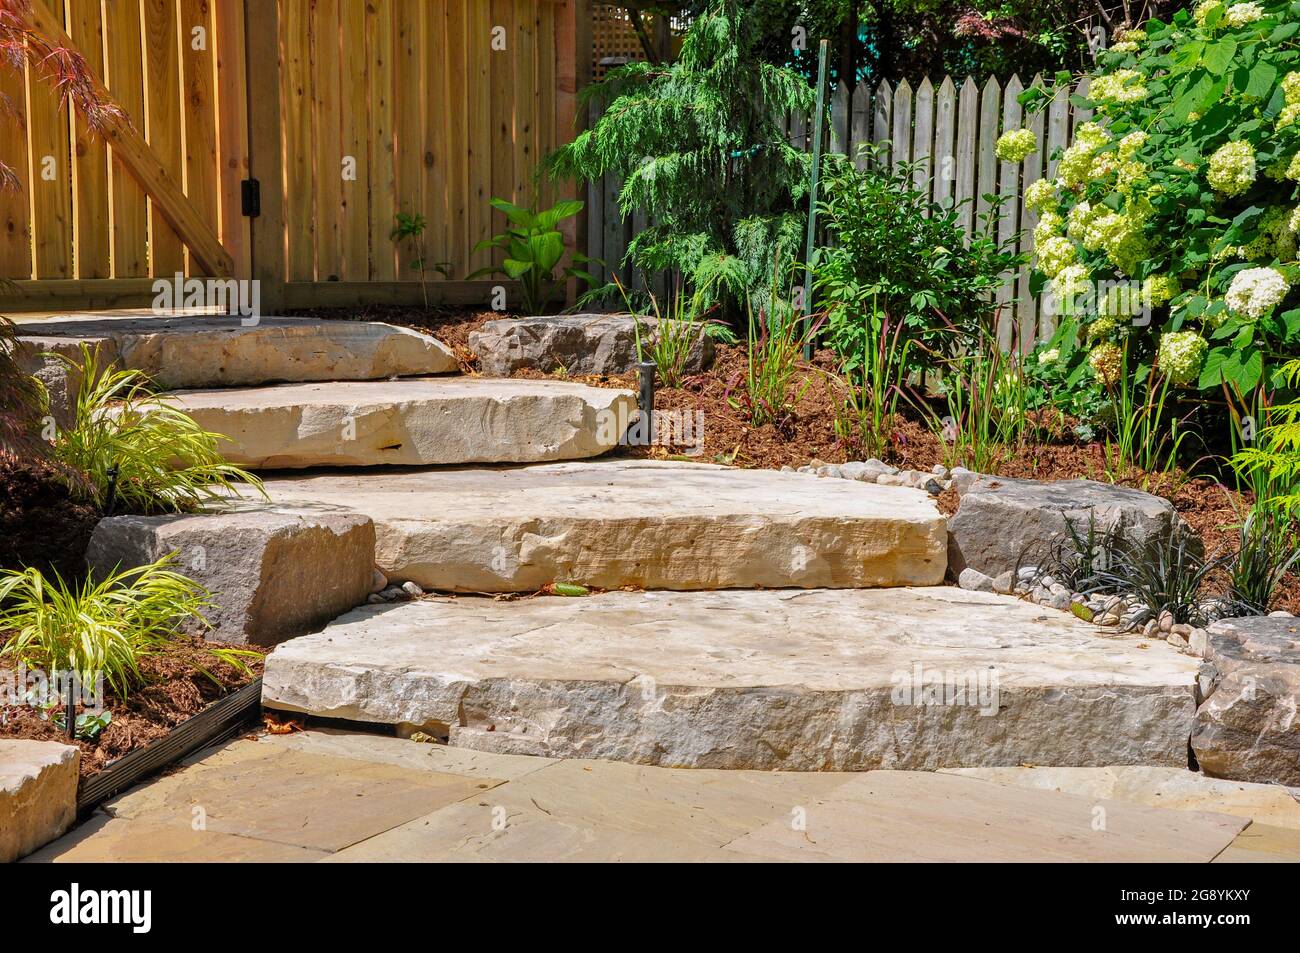 Oversized natural stone slab steps create a beautiful landscape, and a transition to a hidden upper garden in this front yard urban garden. Stock Photo